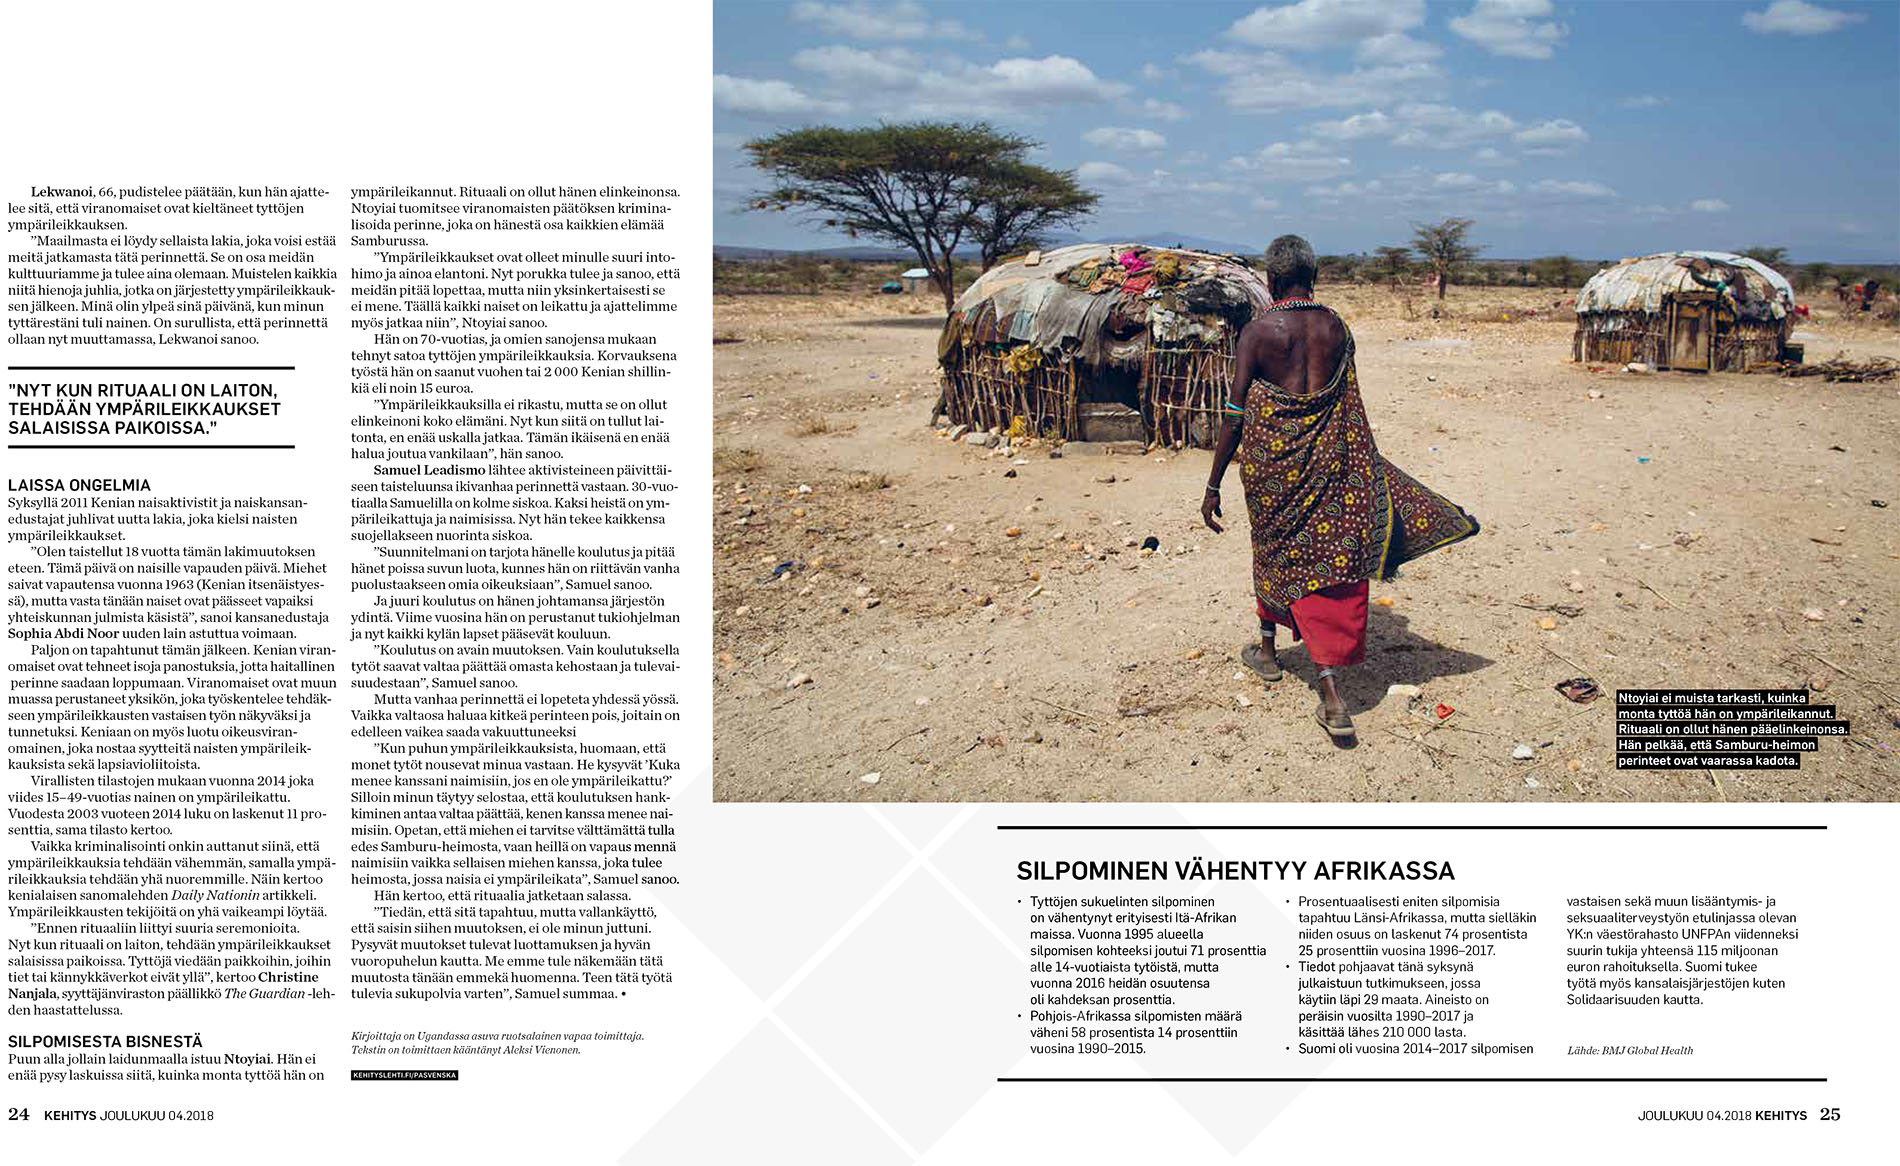 Cover Story: The men who fight against FGM